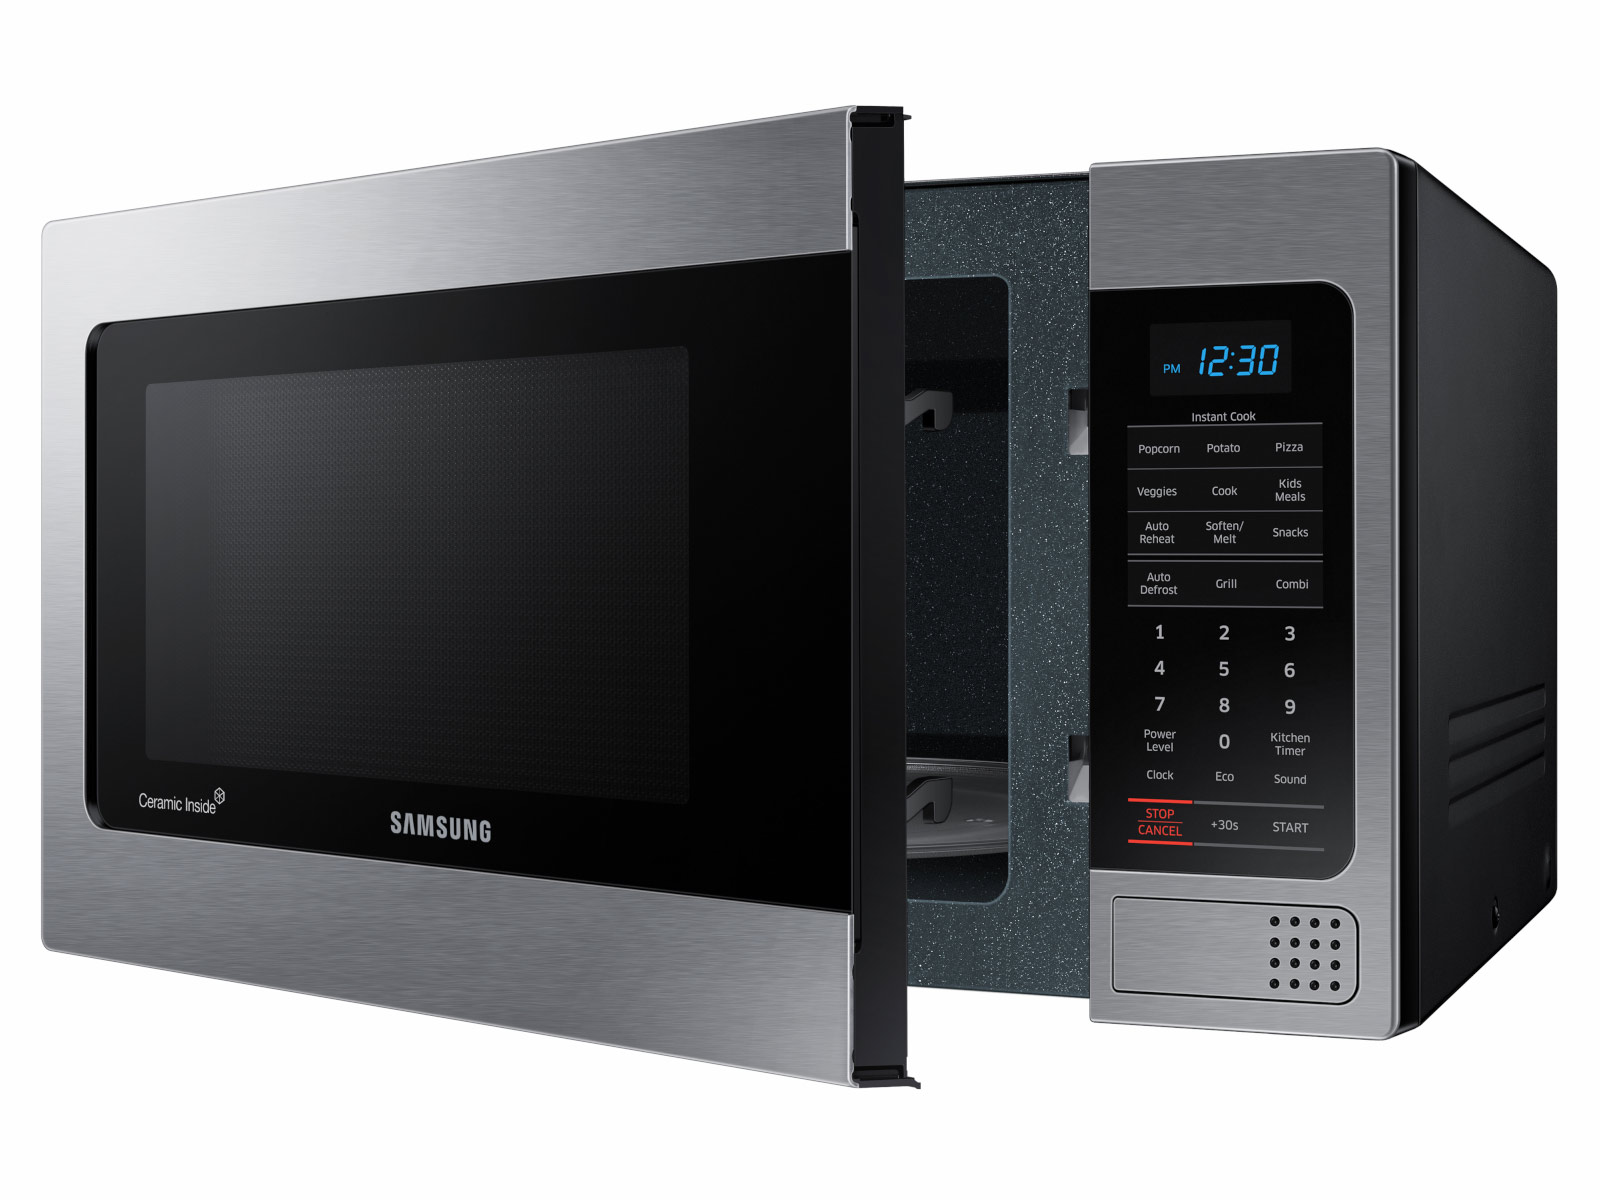 https://image-us.samsung.com/SamsungUS/home/home-appliances/microwaves/countertop/pdp/mg11h2020ct-aa/gallery/05_Microwave_Countertop_MG11H2020CT_R-Perspective-Partial_Open_Silver.jpg?$product-details-jpg$